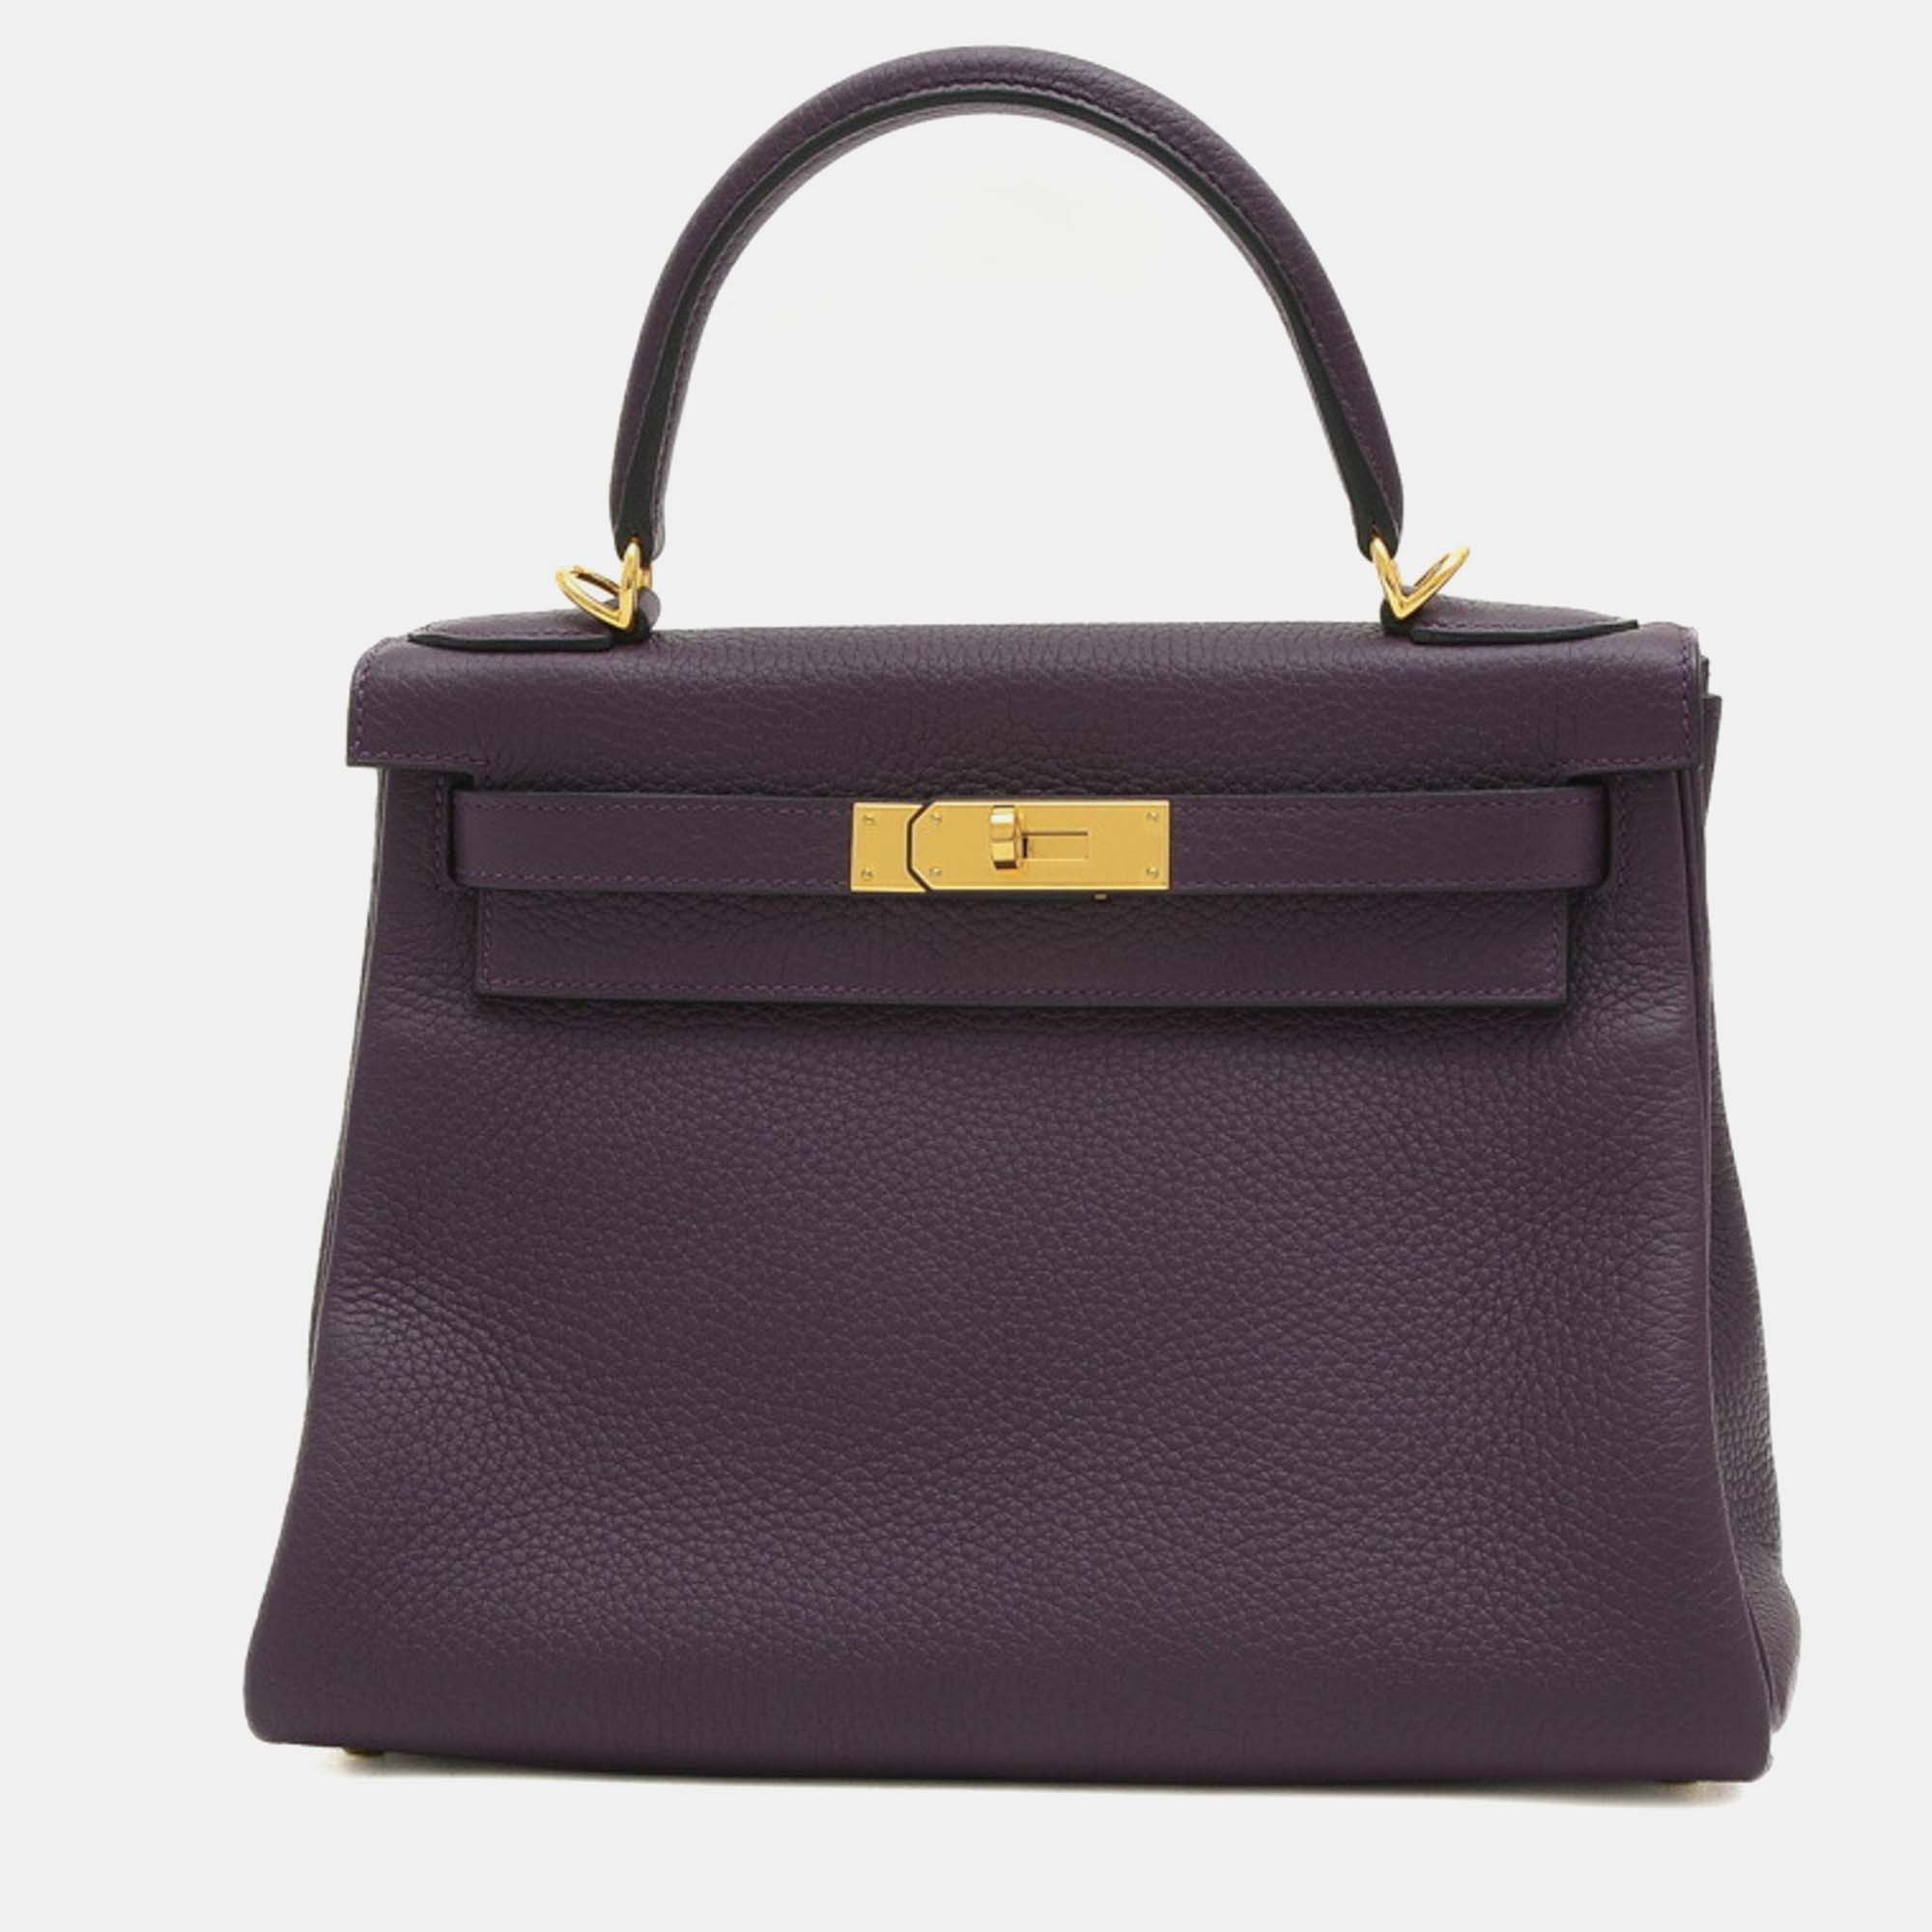 Hermes raisin taurillon clemence leather kelly 28 tote bag